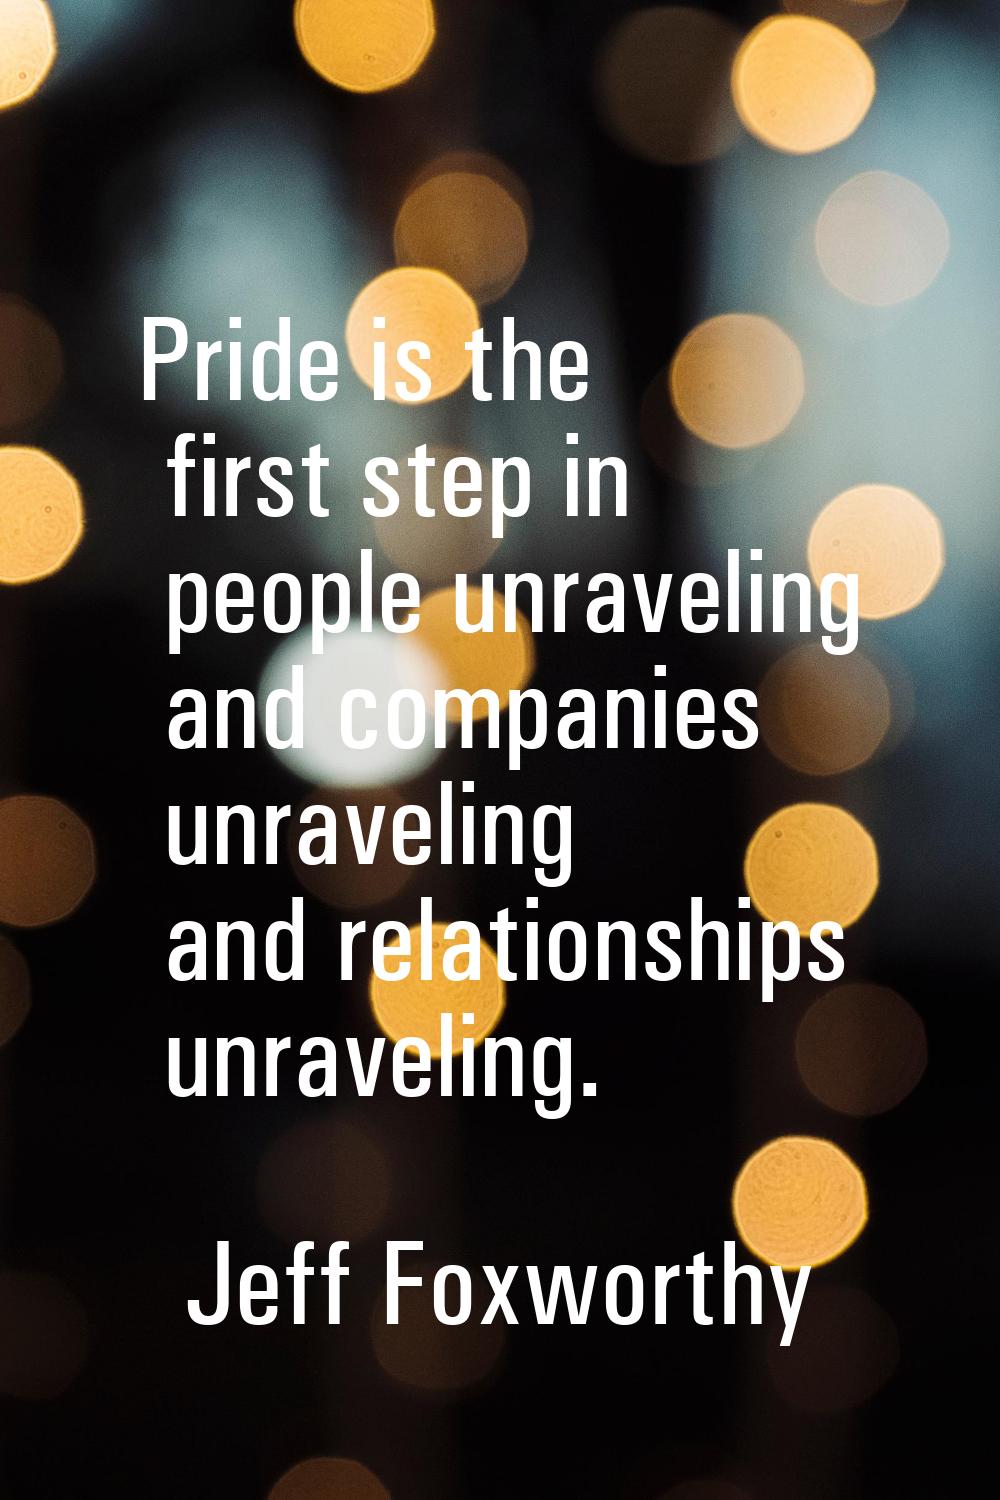 Pride is the first step in people unraveling and companies unraveling and relationships unraveling.